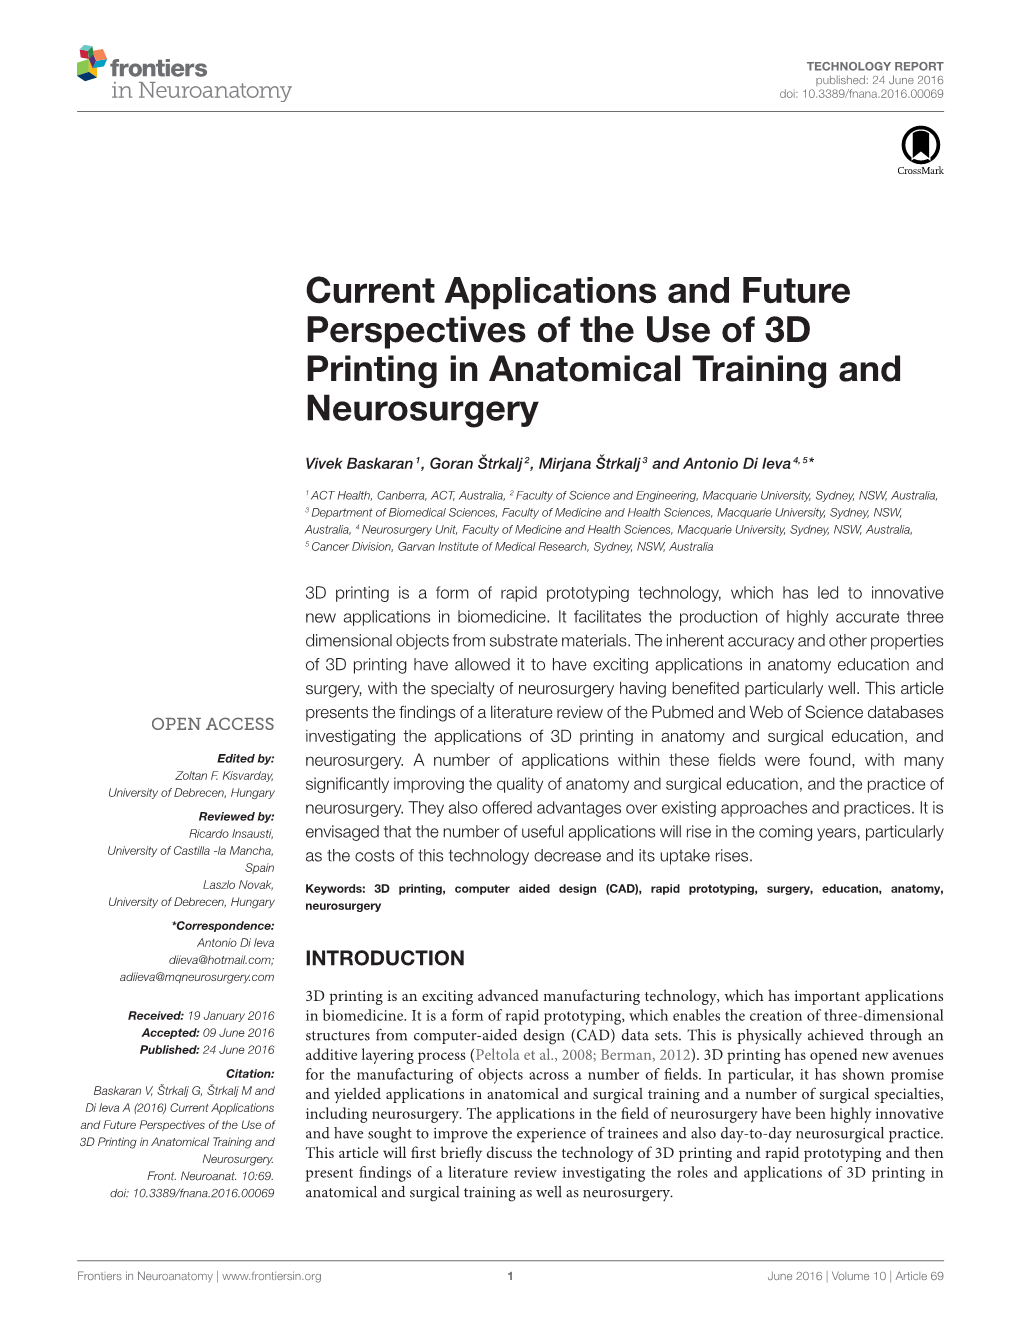 Current Applications and Future Perspectives of the Use of 3D Printing in Anatomical Training and Neurosurgery